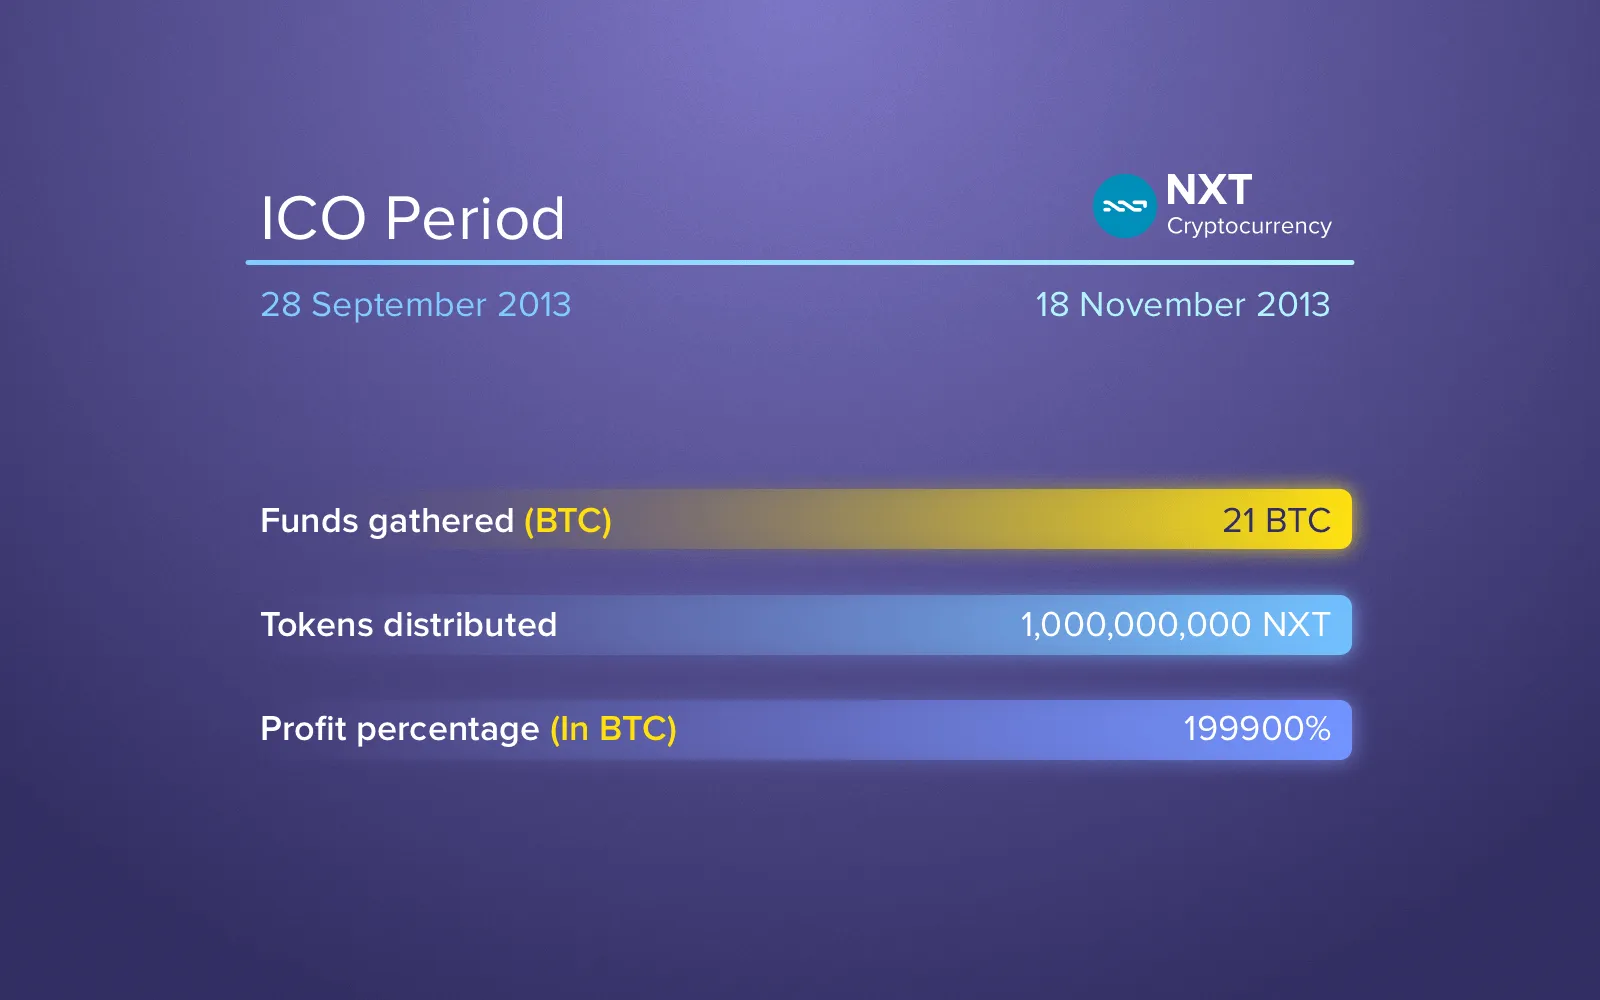 ICO examples: NXT